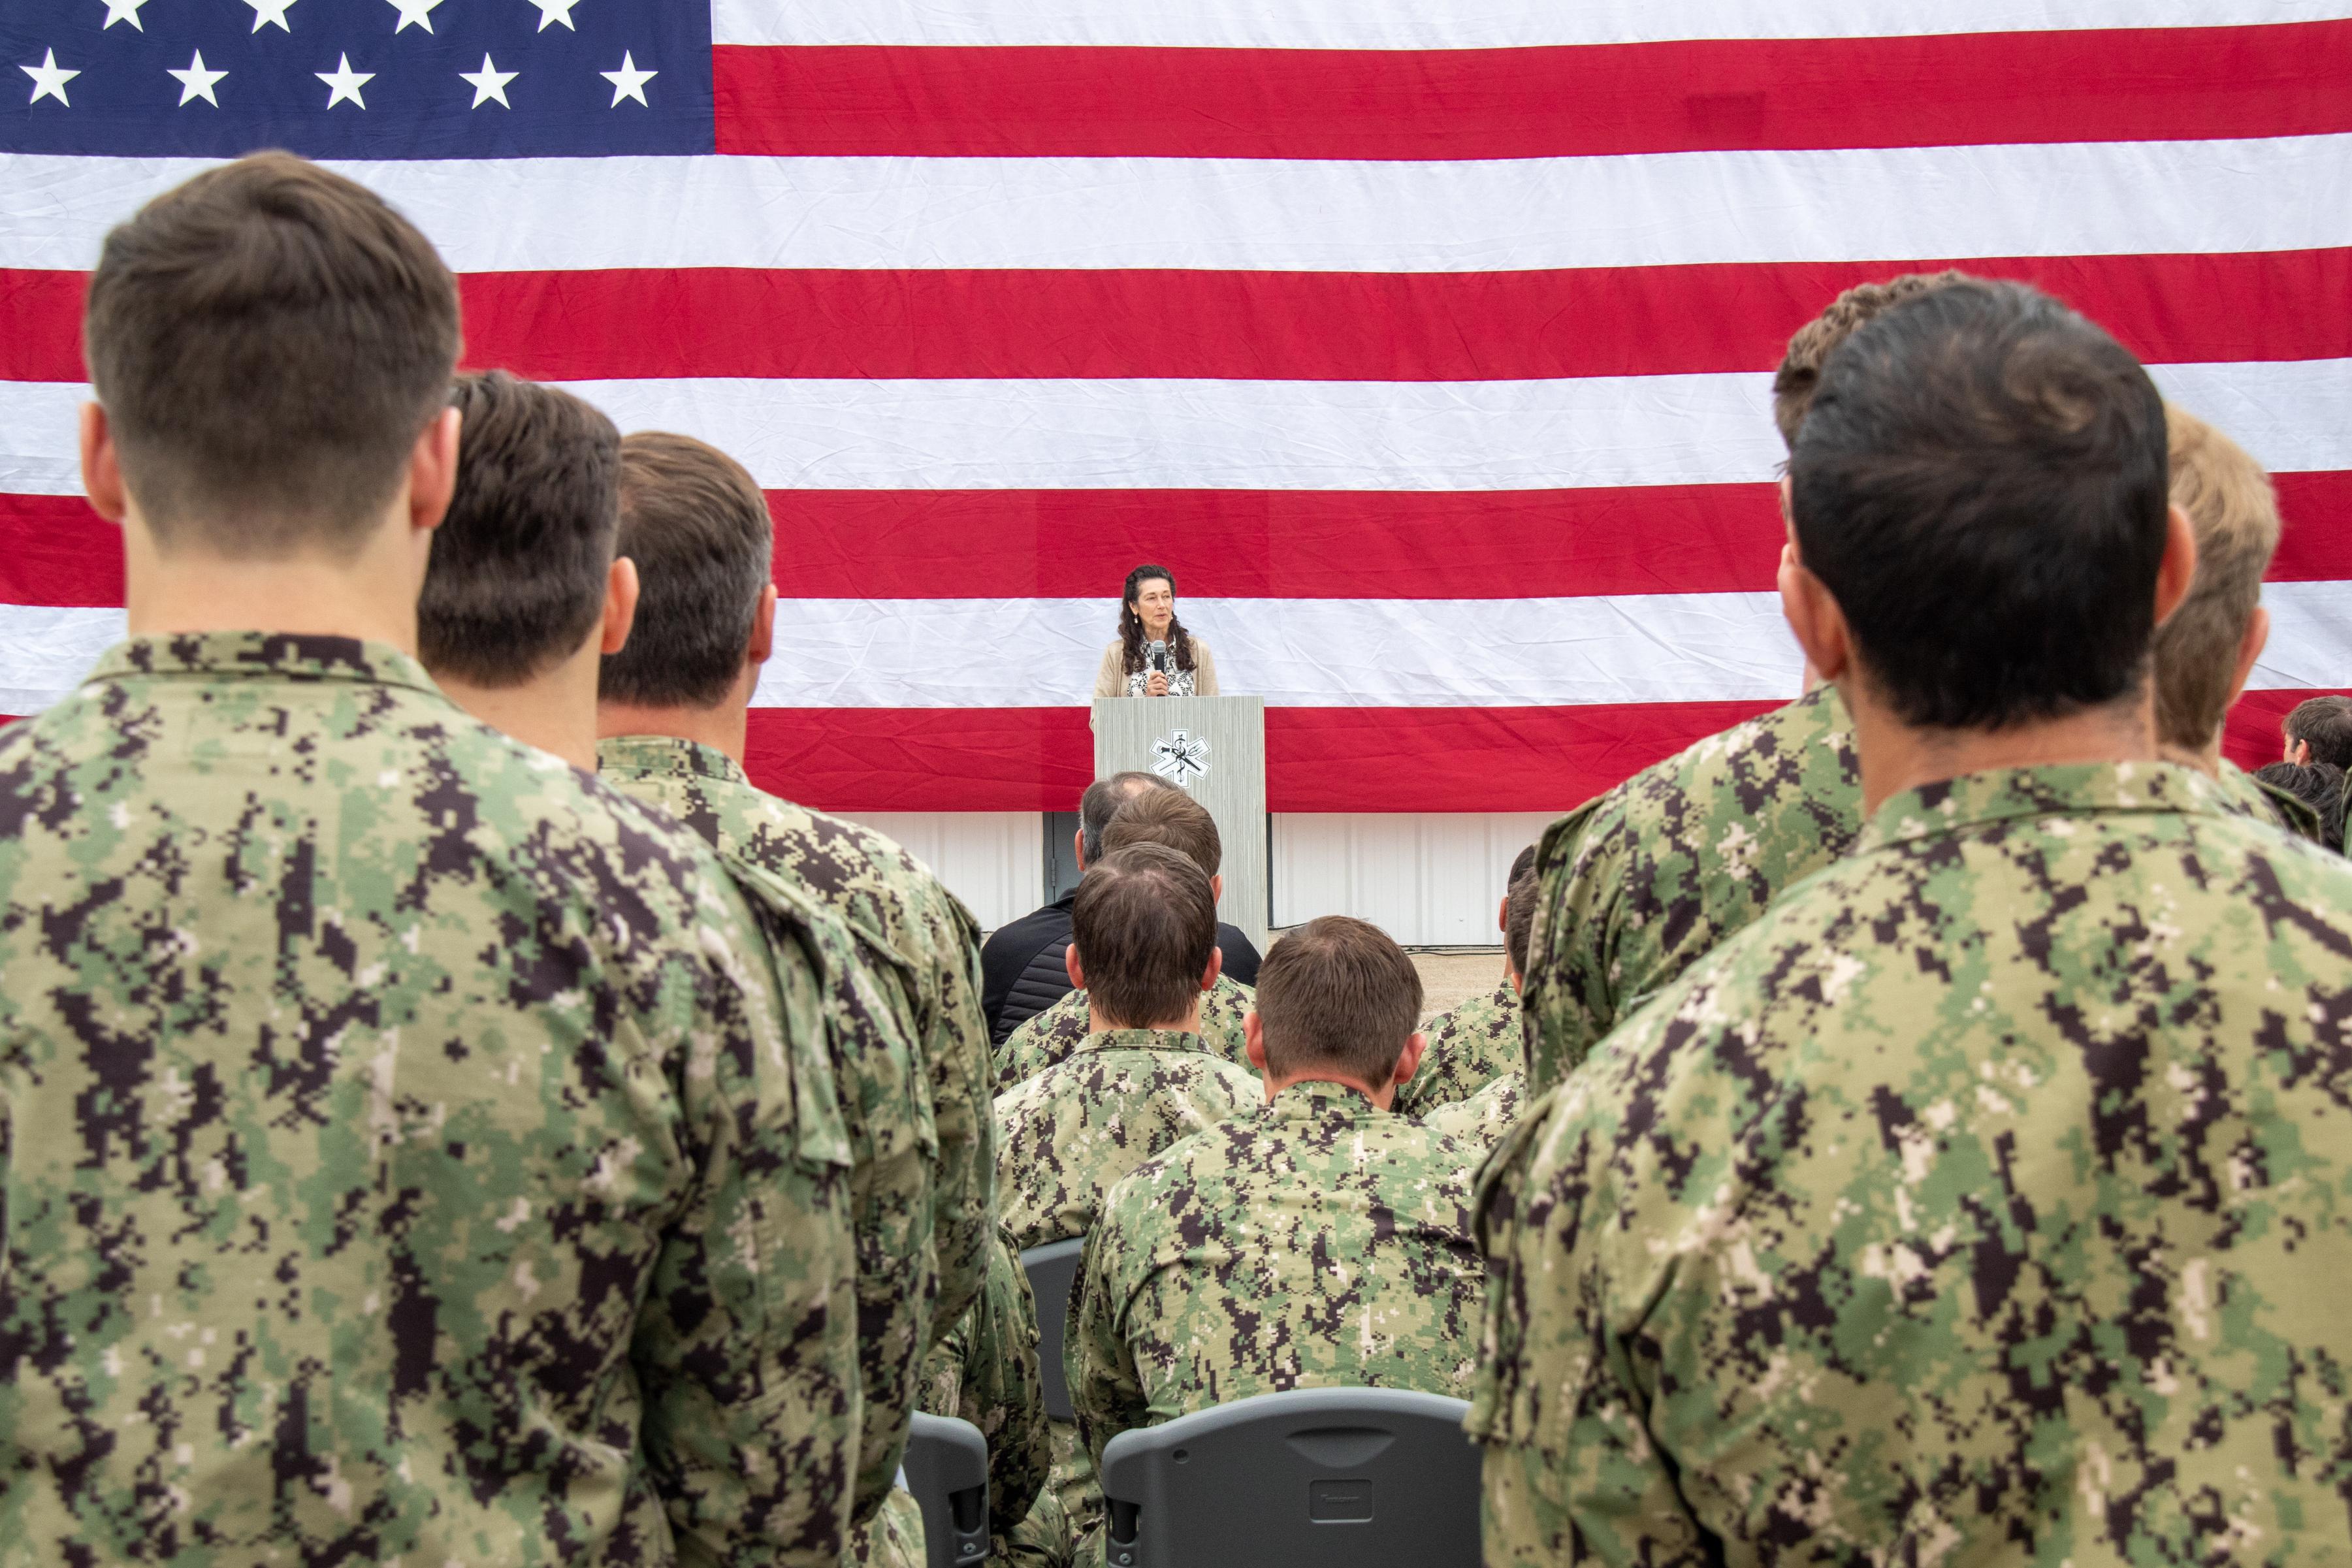 231117-N-LW994-1125 STENNIS SPACE CENTER, Miss. (Nov. 17, 2023) Charlie Ebbert, mother of deceased U.S. Navy Special Warfare Operator 1st Class Kevin Ebbert, gives a speech in memory of her son during a ceremony to dedicate the quarterdeck of the Special Operations Tactical Medicine schoolhouse at John C. Stennis Space Center